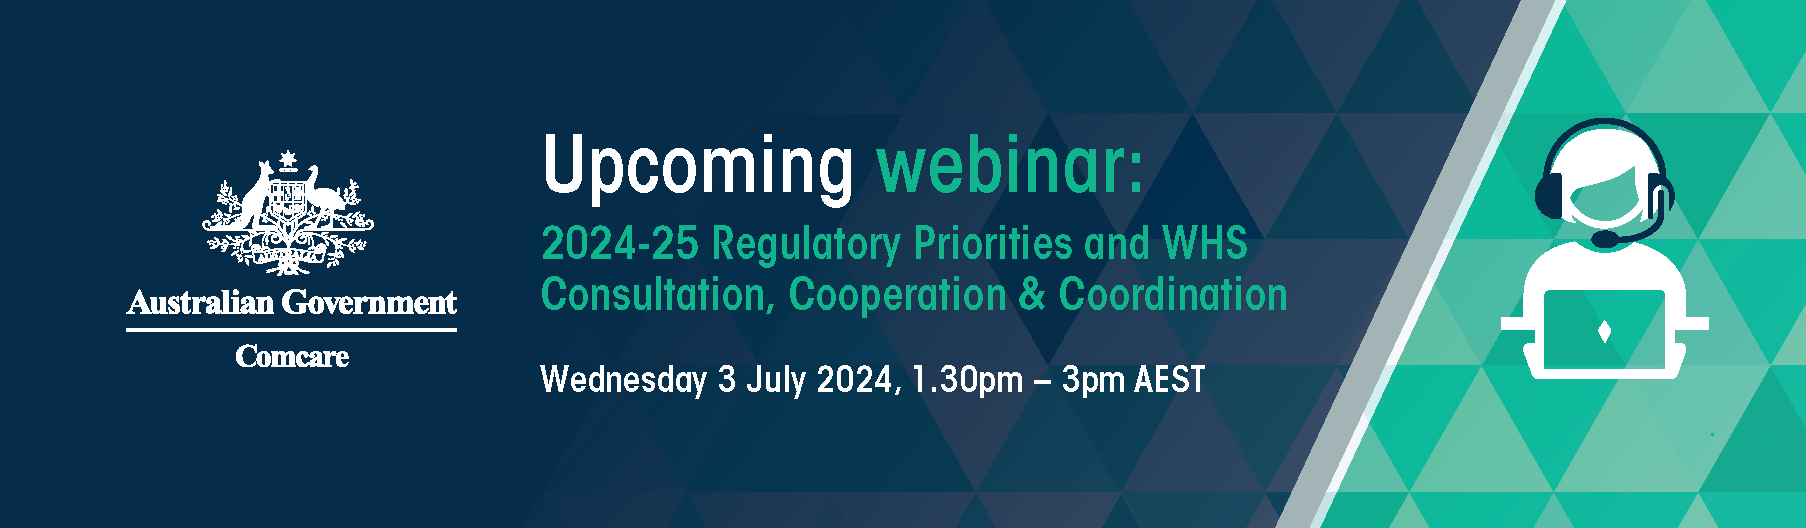 Upcoming Webinar: 2024-25 Regulatory Priorities and WHS Consultation, Cooperation and Coordination